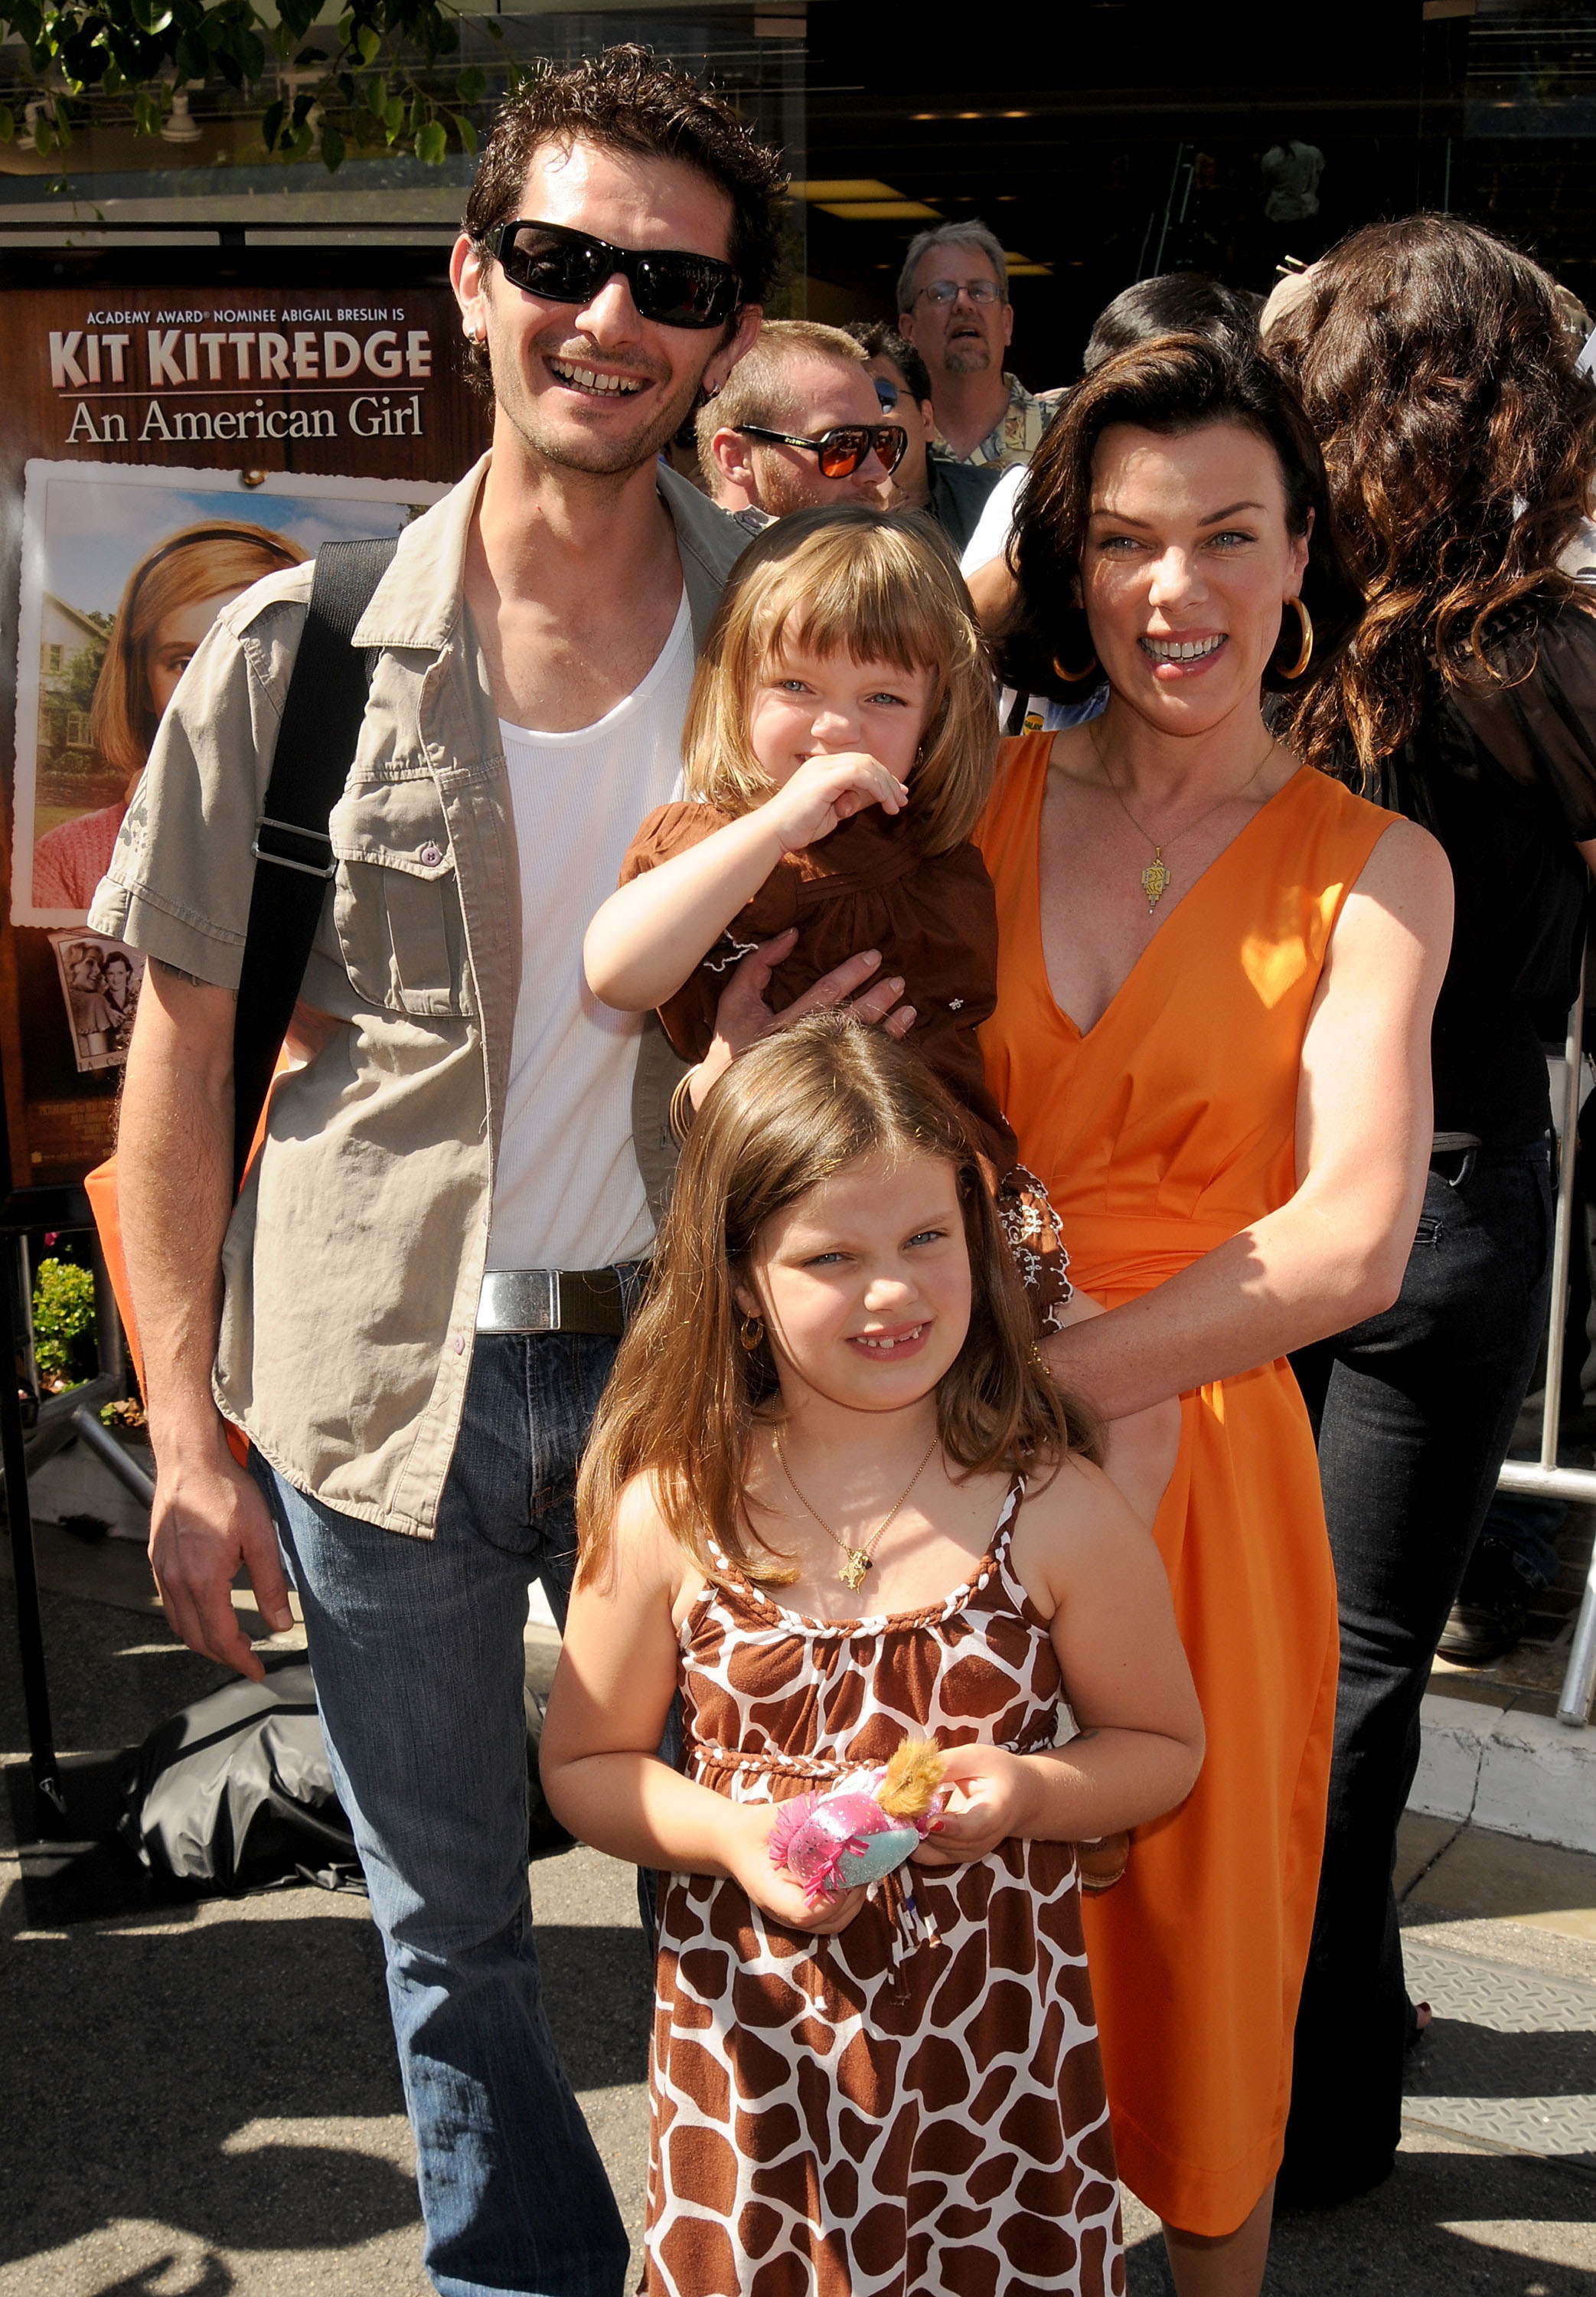 <p>Actress Debi Mazar and husband Gabriele Corcos brought their daughters, 5-year-old Evelina and 2-year-old Giulia, to the "Kit Kittredge: An American Girl" premiere in Los Angeles in June 2008.</p>